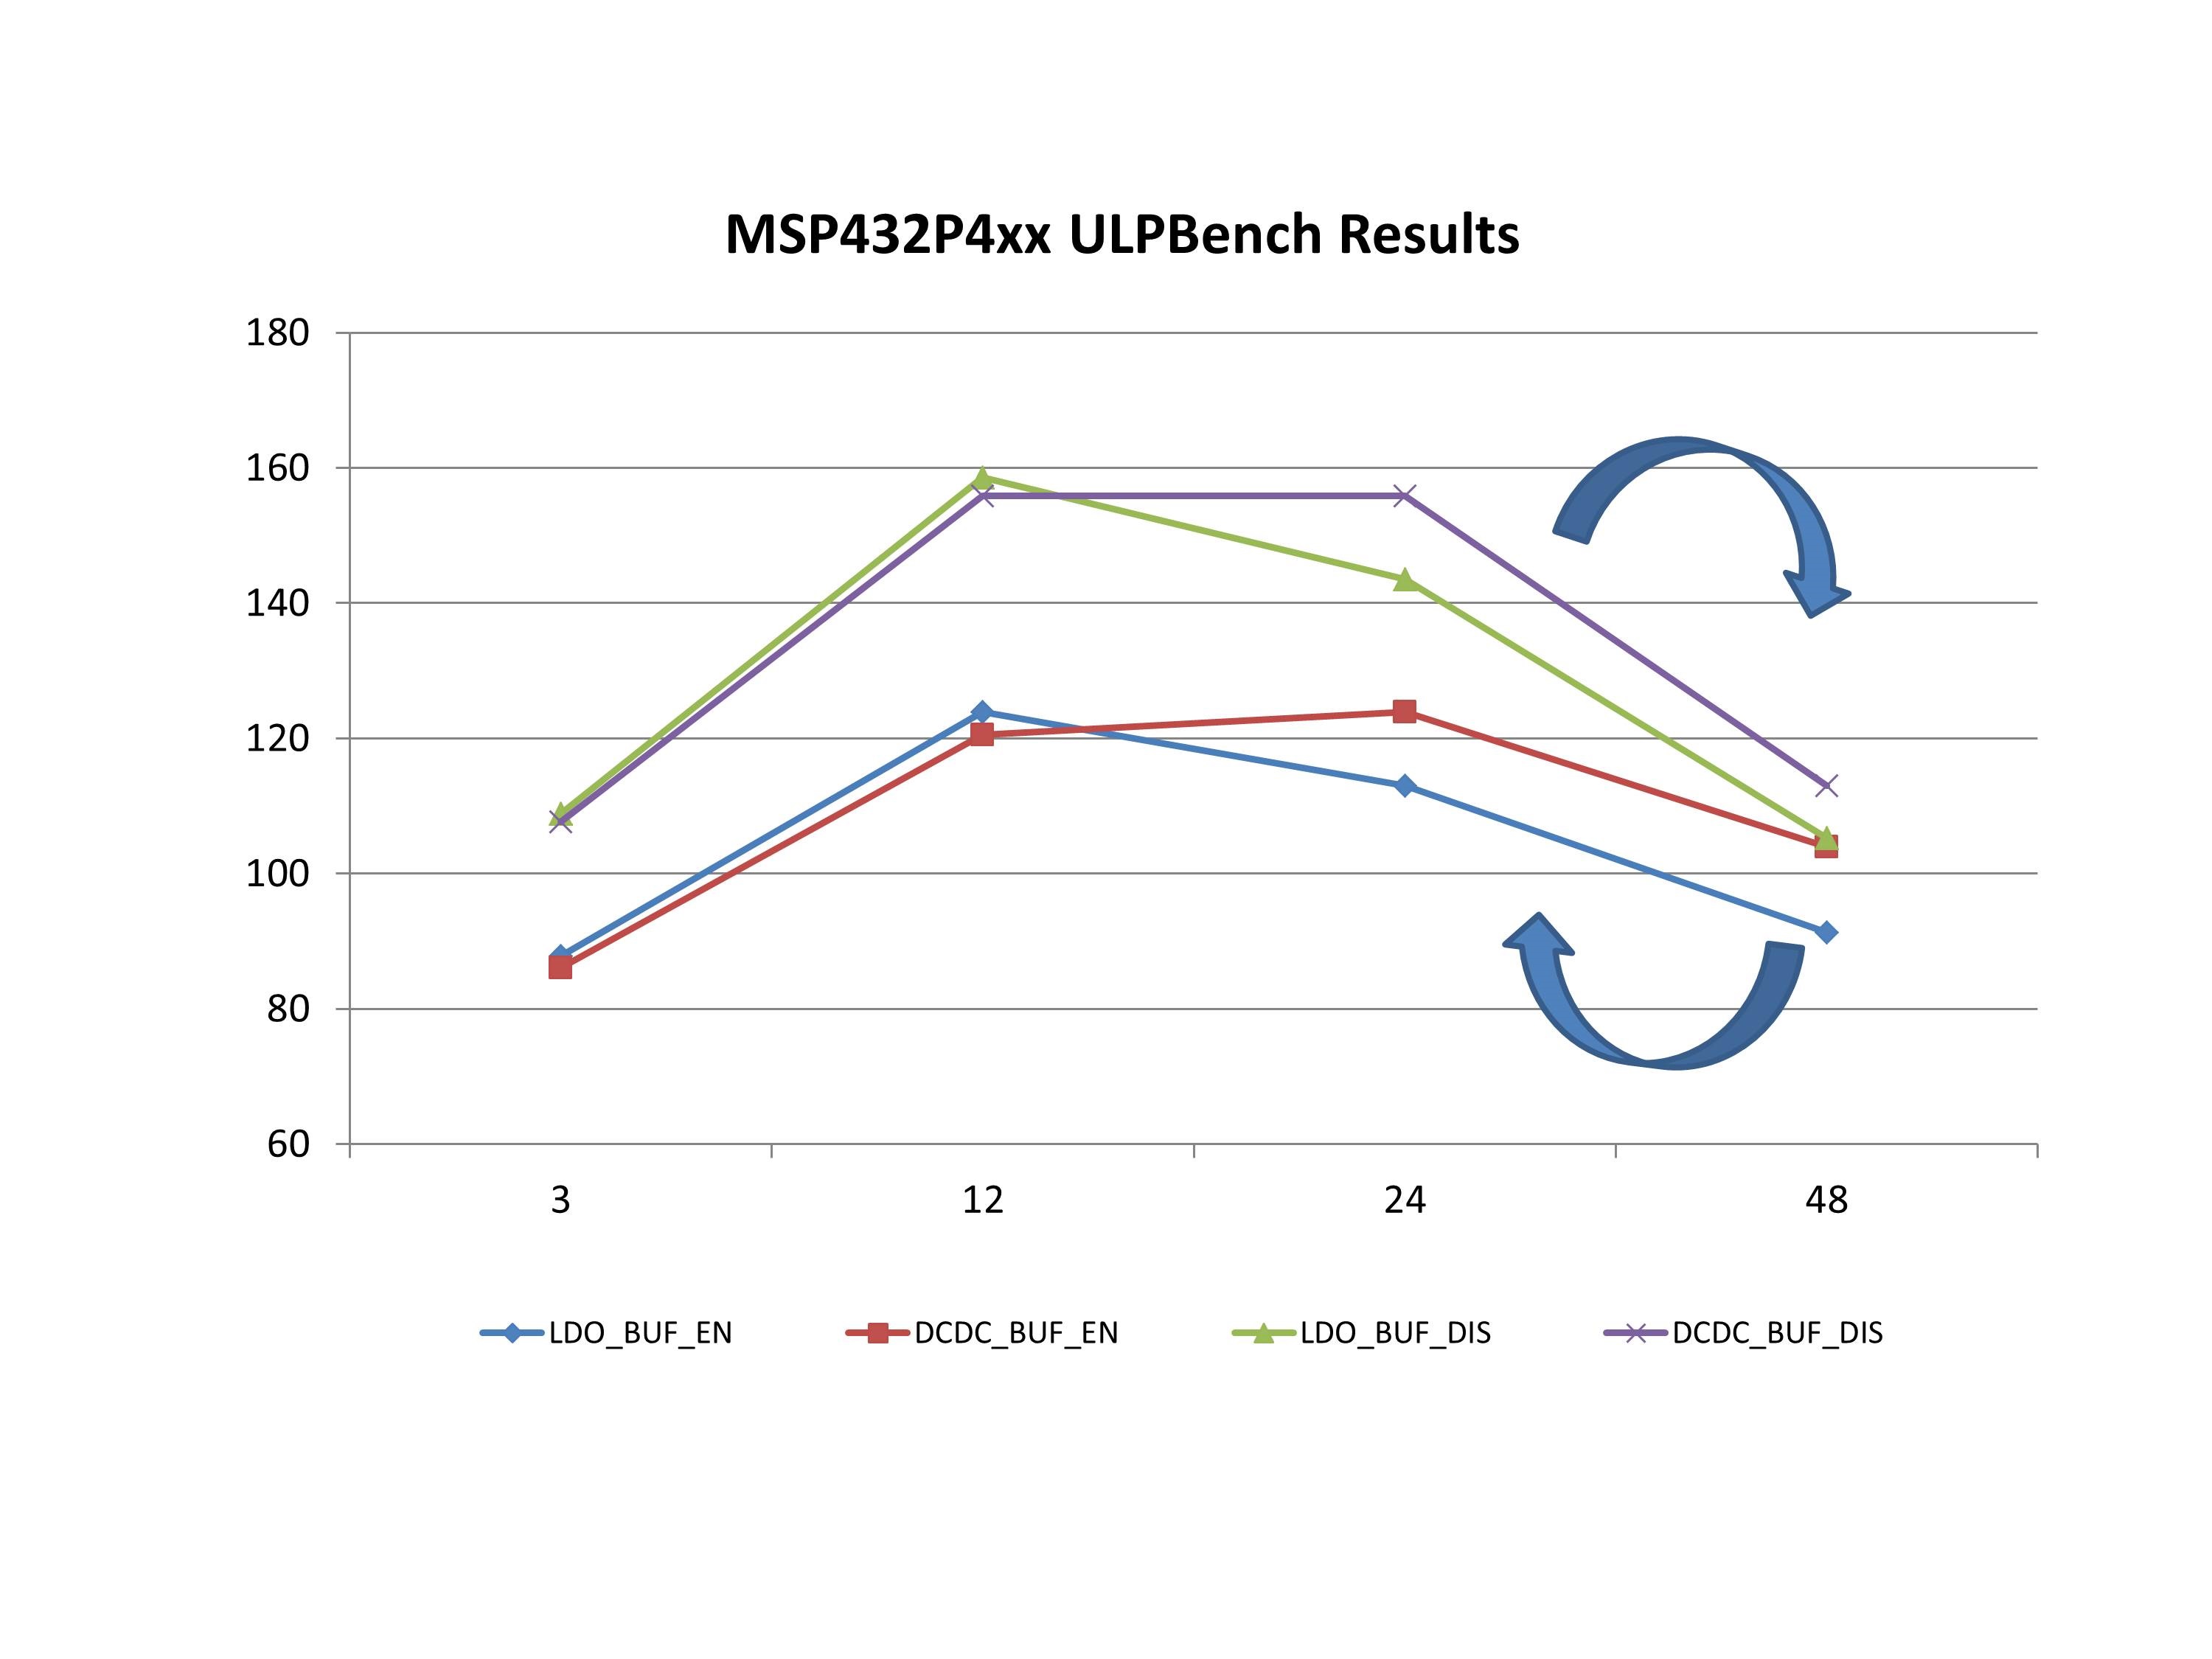 Figure 1: Determining the optimal MSP432 MCU system options for ULPBench